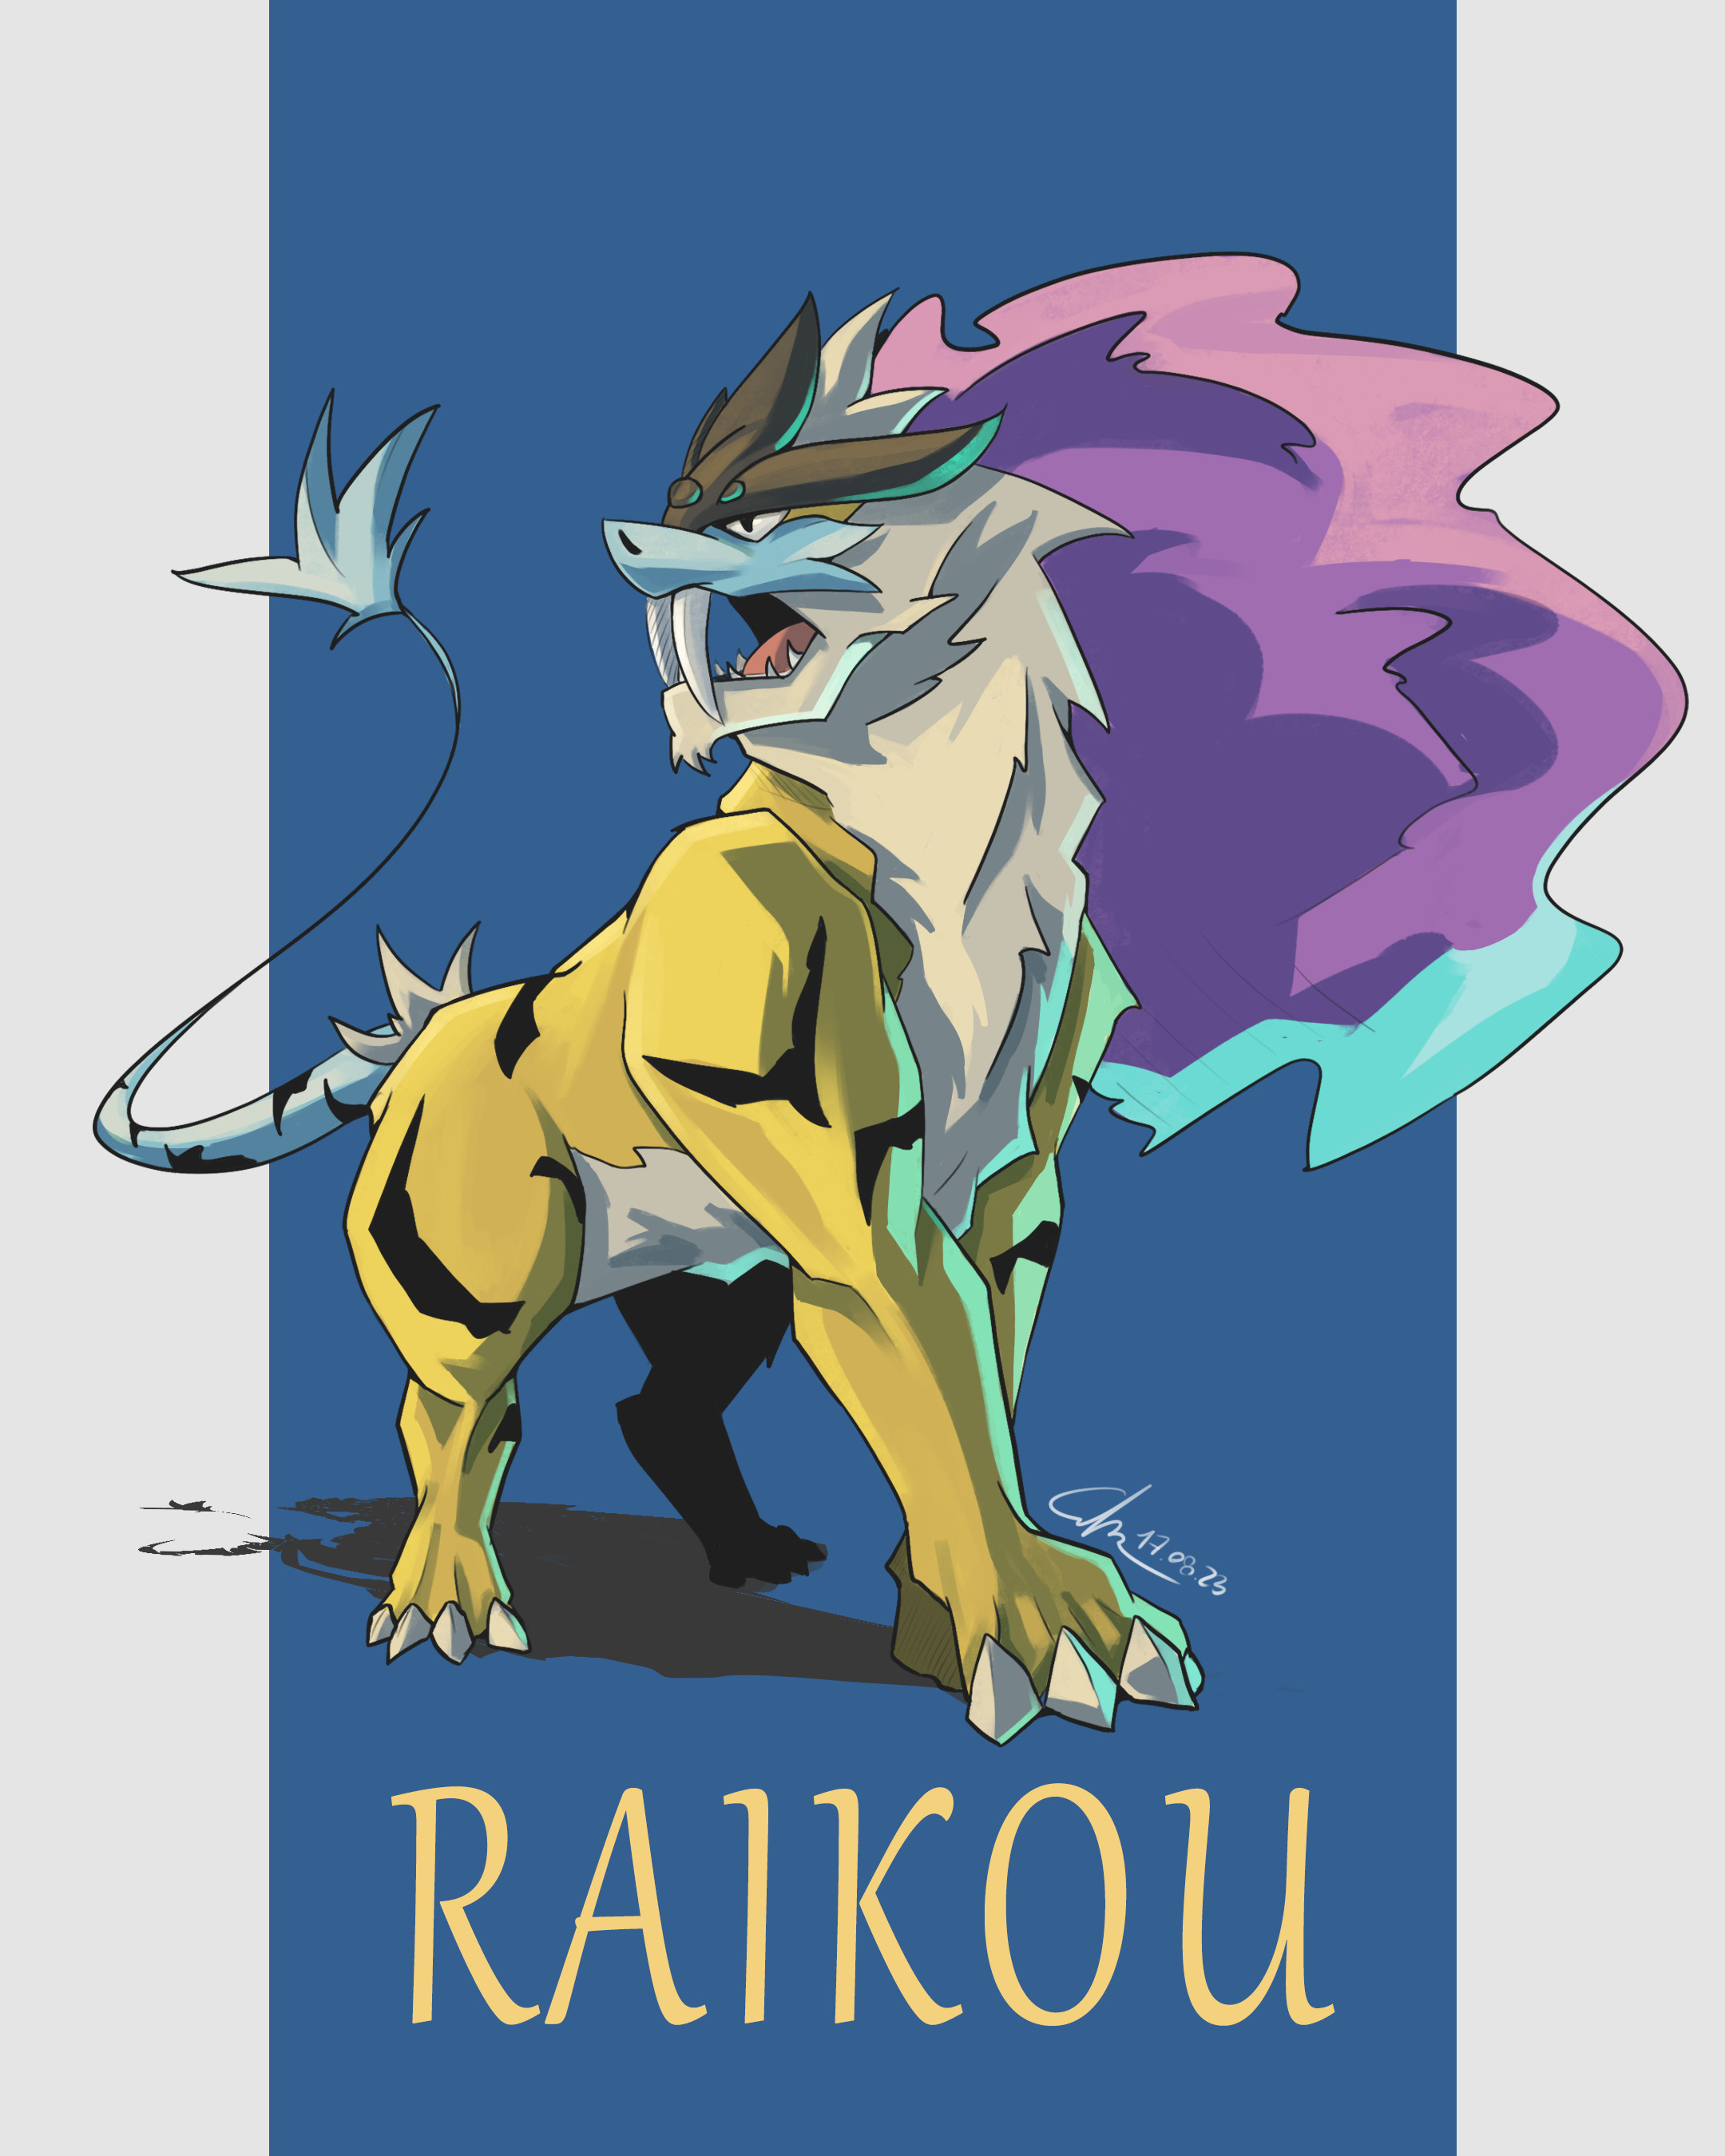 Last post was suicune, so this had to be next! . . #raikou